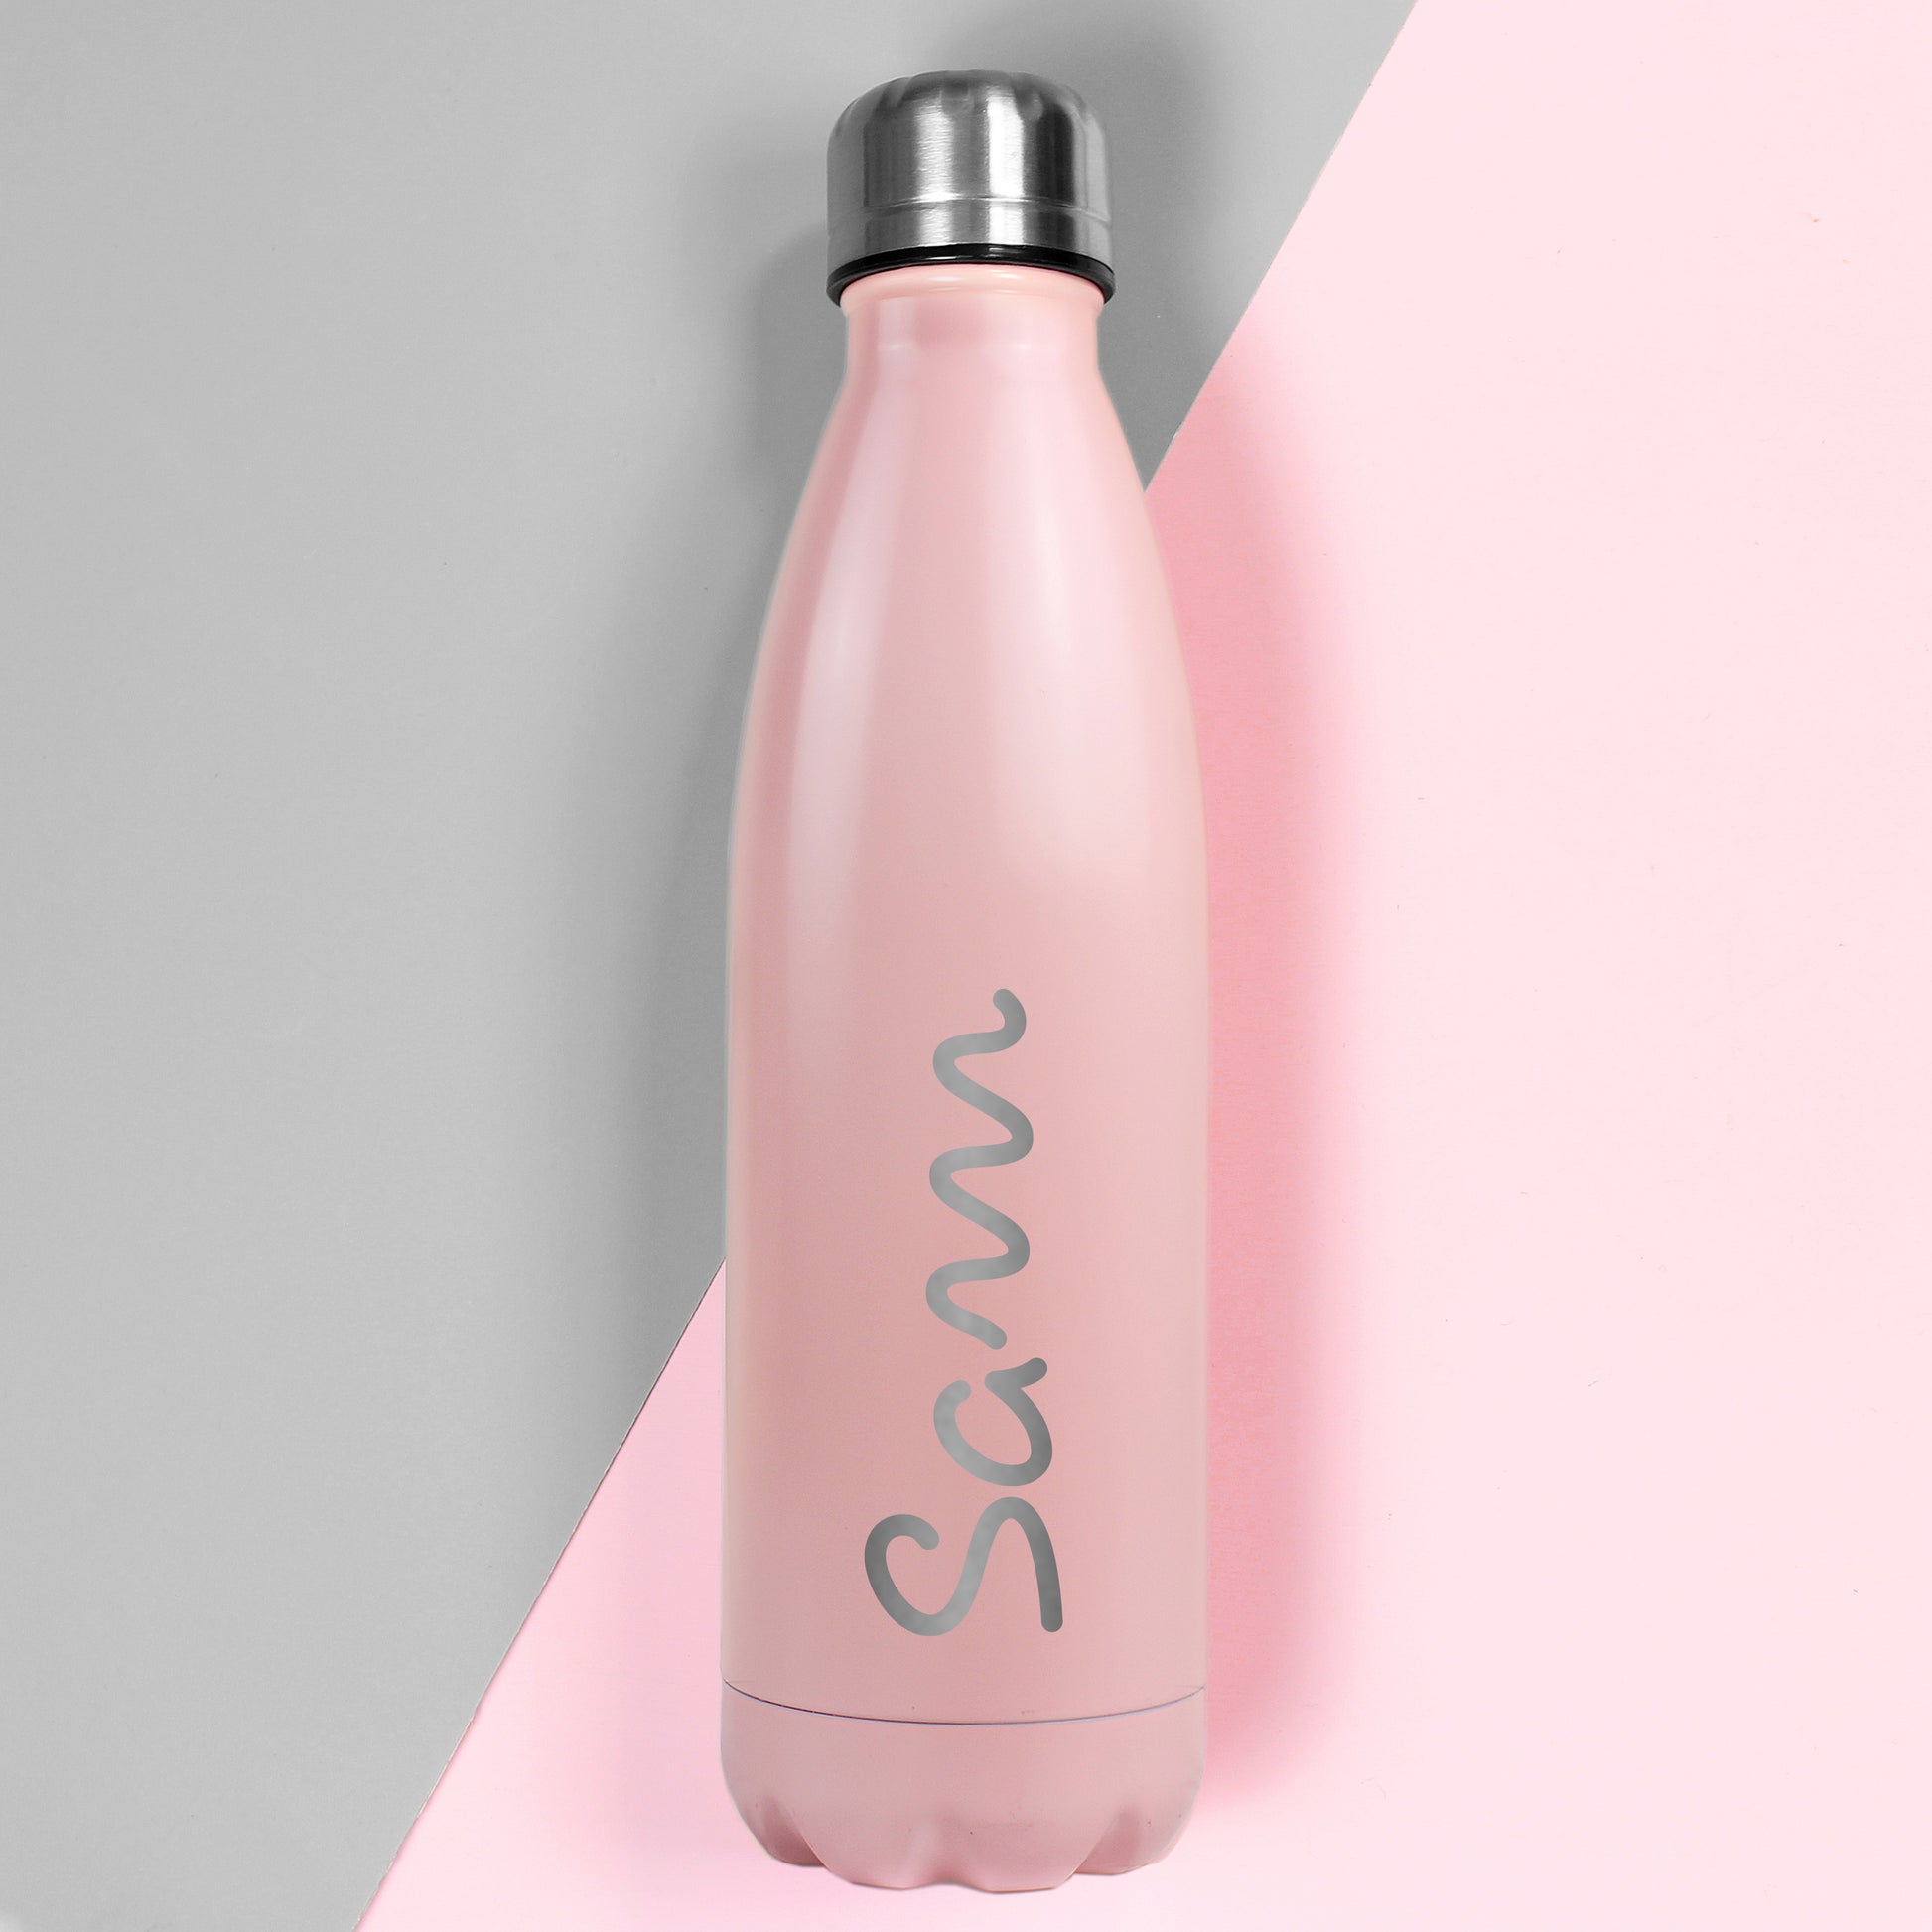 Island themed pink insulated drinks bottle - Lilybet loves